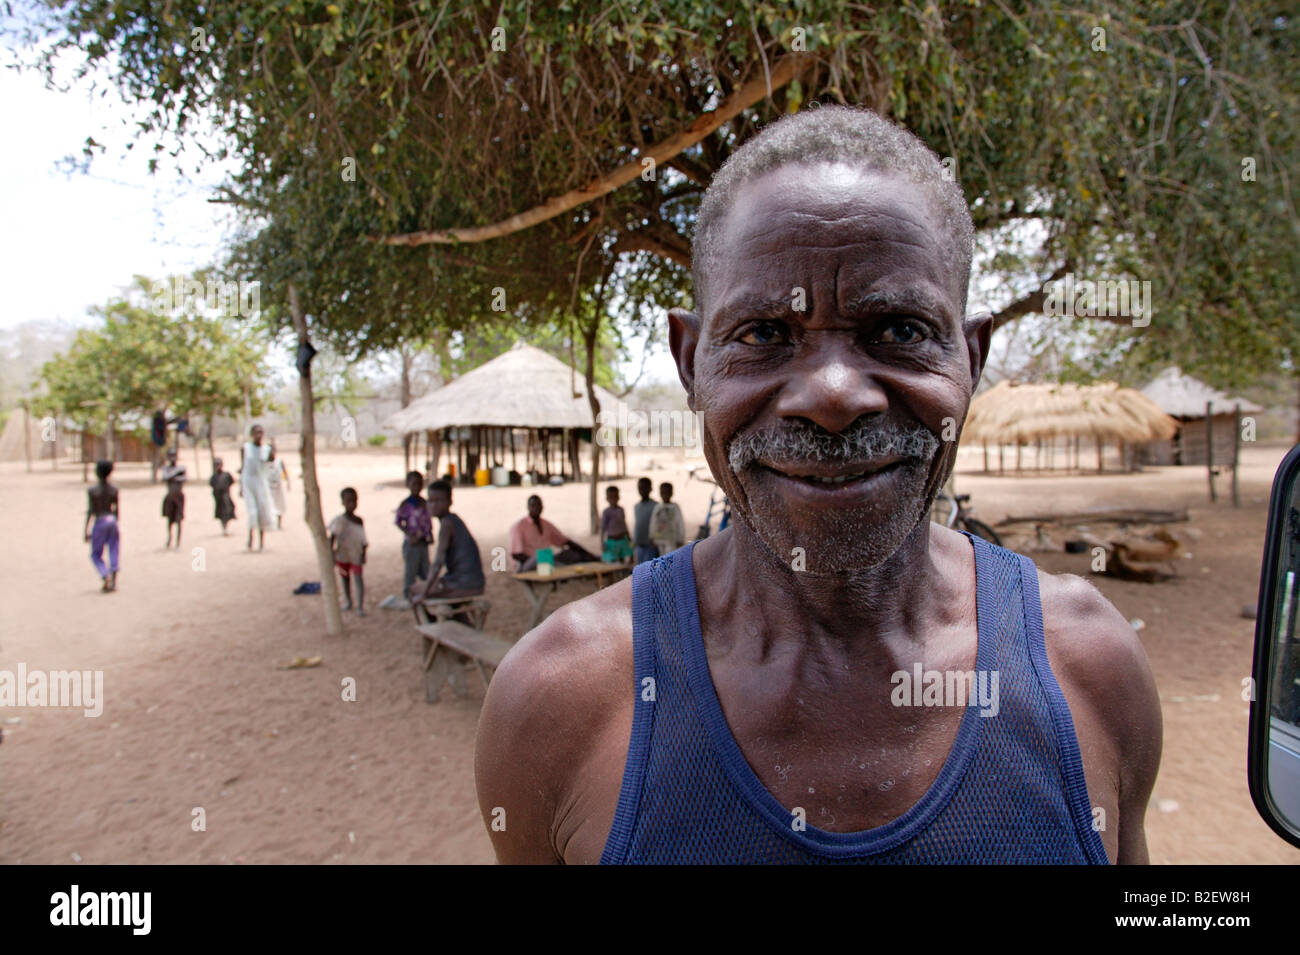 A villager poses in a rural village in Zinave in Mozambique Stock Photo